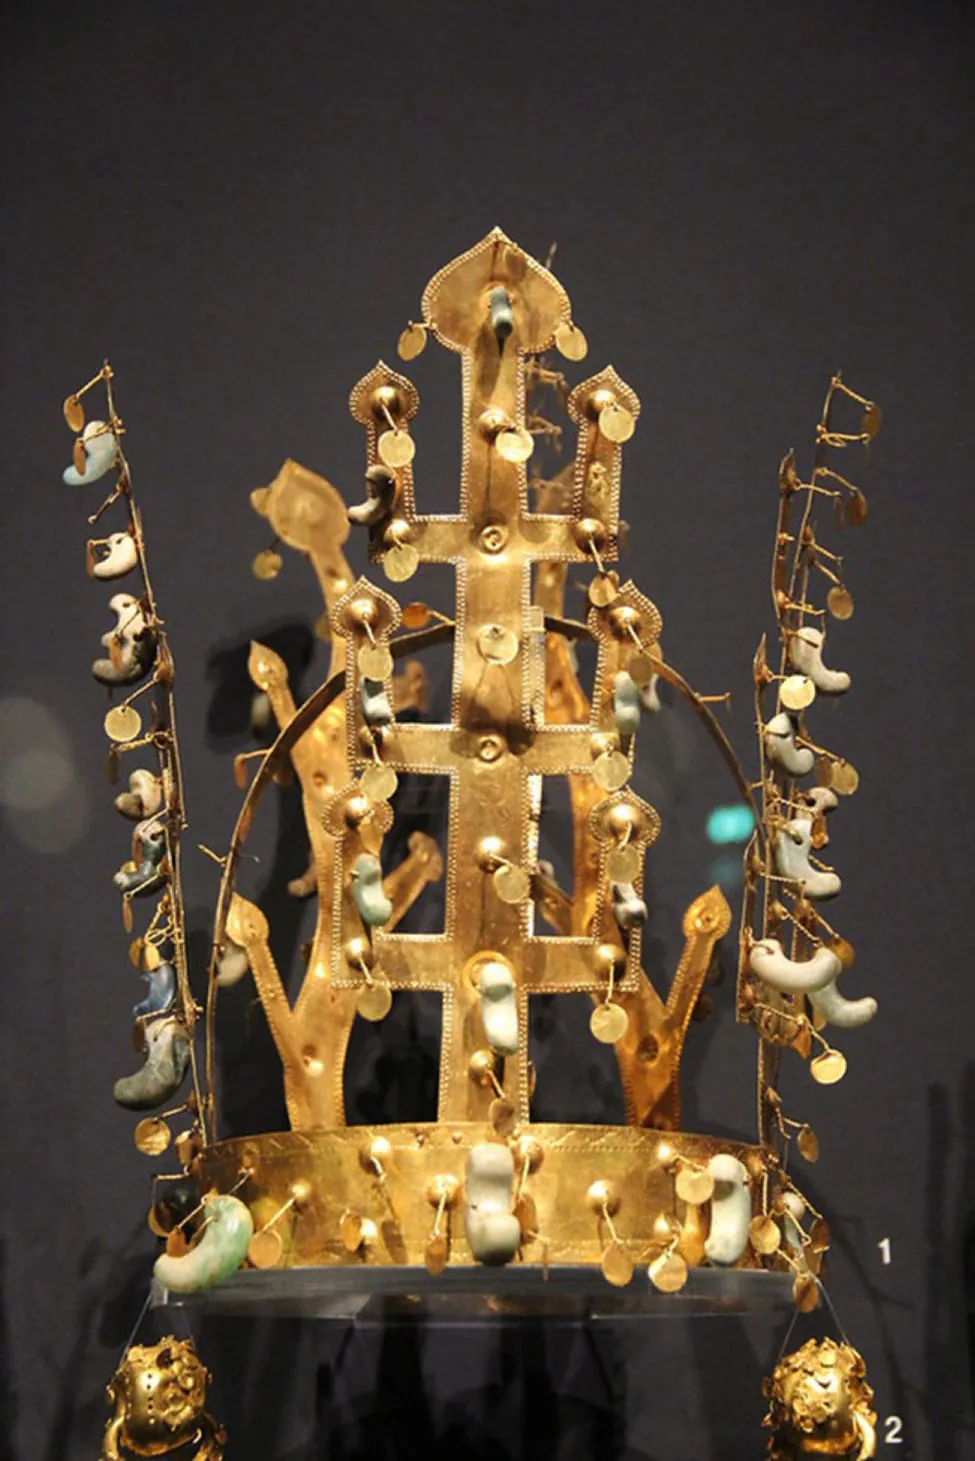 A picture of a gold crown. The crown has etchings along the edges throughout. Two tall pieces stick up at each side of the bottom round band and in the middle of the crown a tall piece sticks upright with three elbow projections on each side with leaf-like decor at the ends as well as at the top. The back of the crown has two long stems sticking upright with four similar leaf-like endings. A piece goes from the left and bends and connects on the right side. Small knobs are seen throughout the crown with small “C” shaped white and pale blue and green objects in varying sizes attached with gold or white strings.